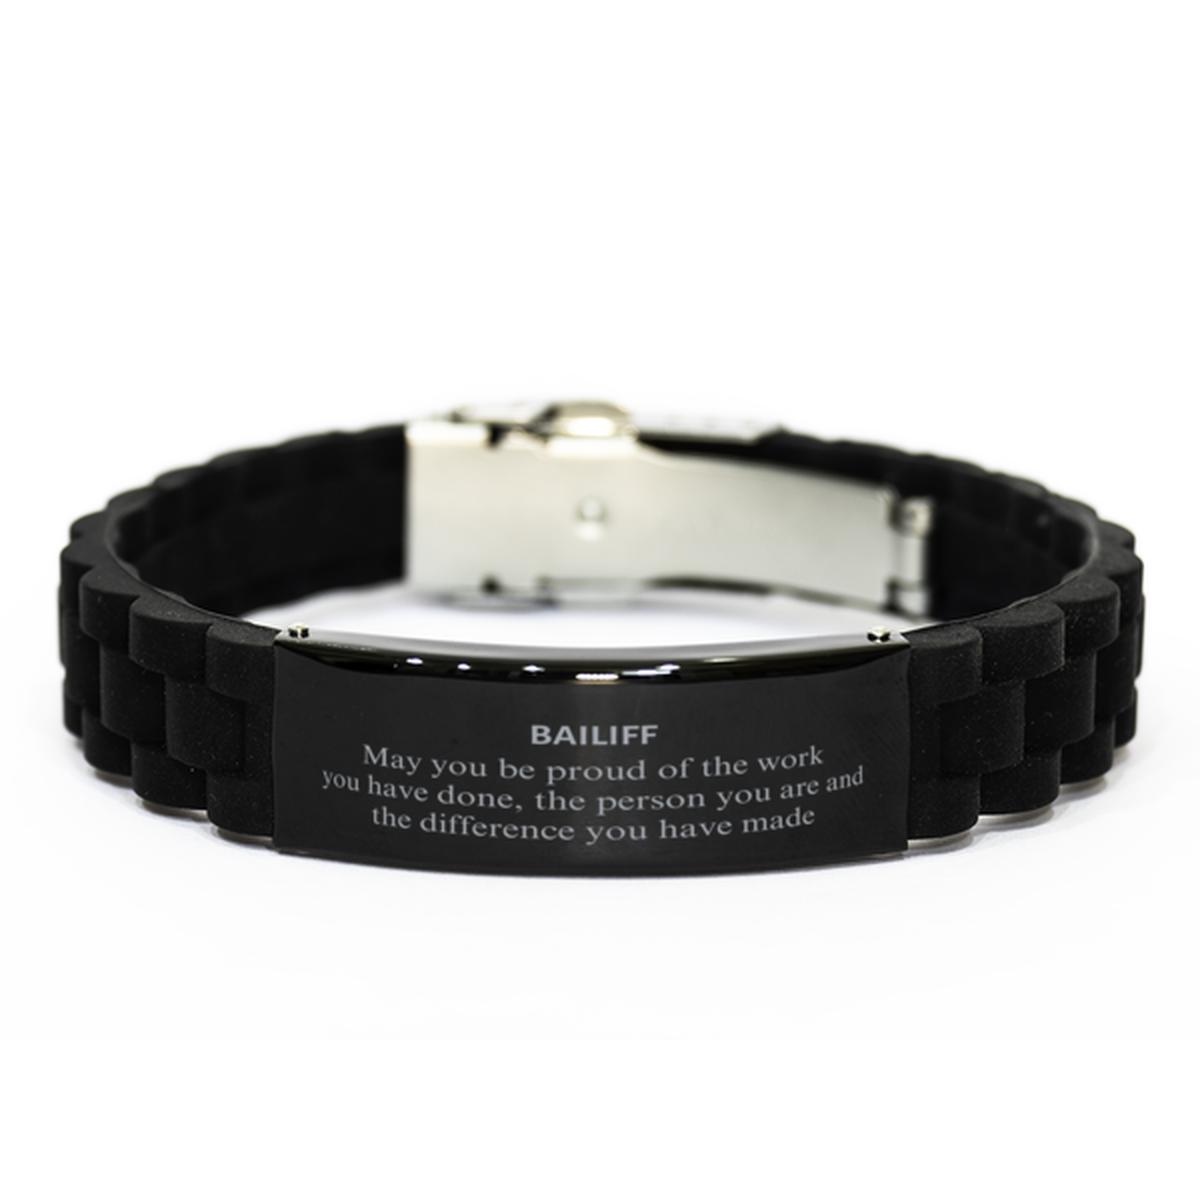 Bailiff May you be proud of the work you have done, Retirement Bailiff Black Glidelock Clasp Bracelet for Colleague Appreciation Gifts Amazing for Bailiff